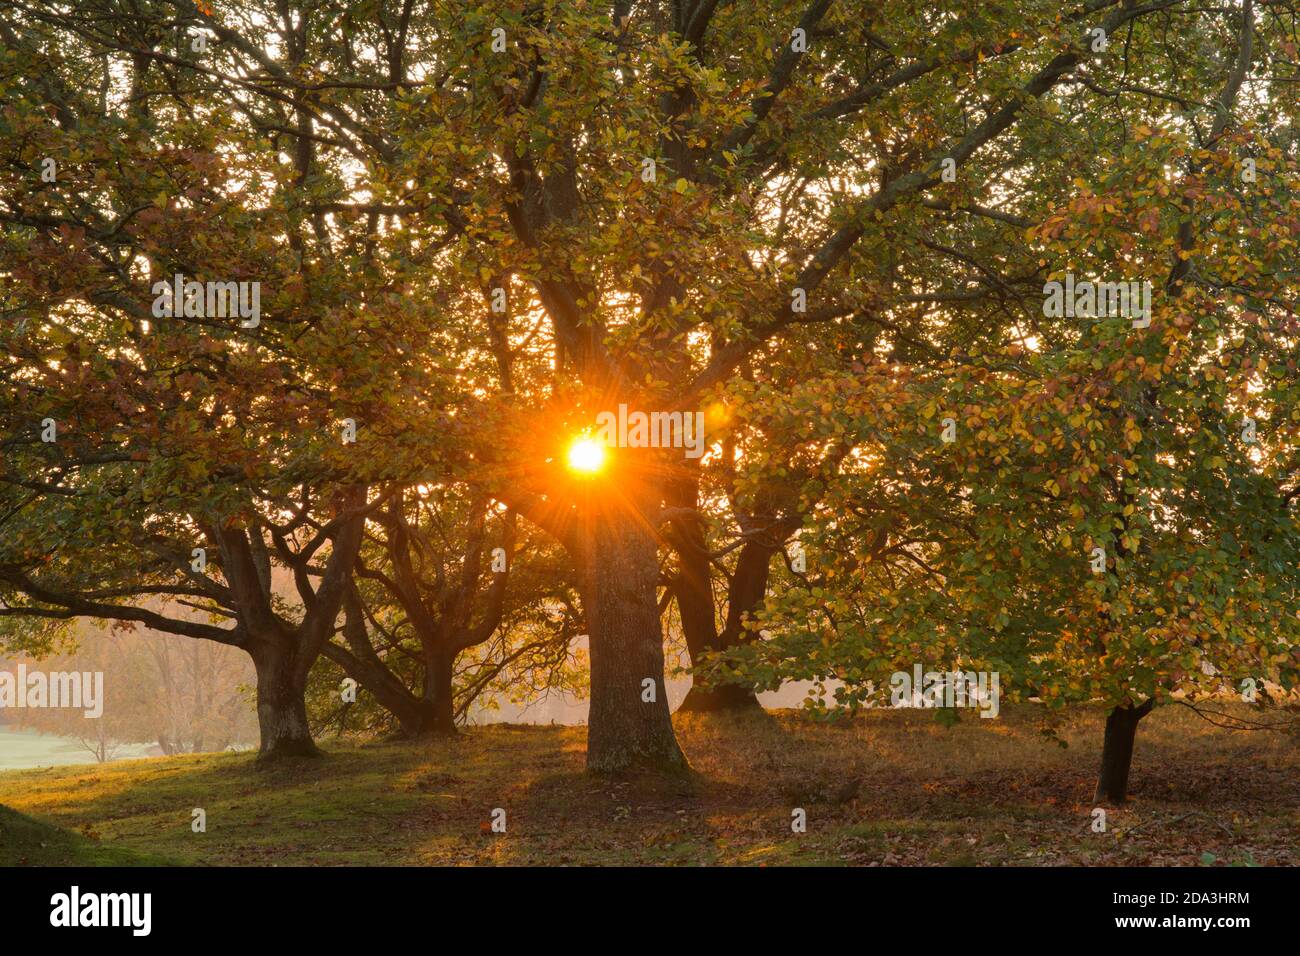 Common Beech, Fagus sylvatica, Oak, Qurcus, sun setting behind coloured leaves in autumn sun showing through golden trees in fall, November Stock Photo